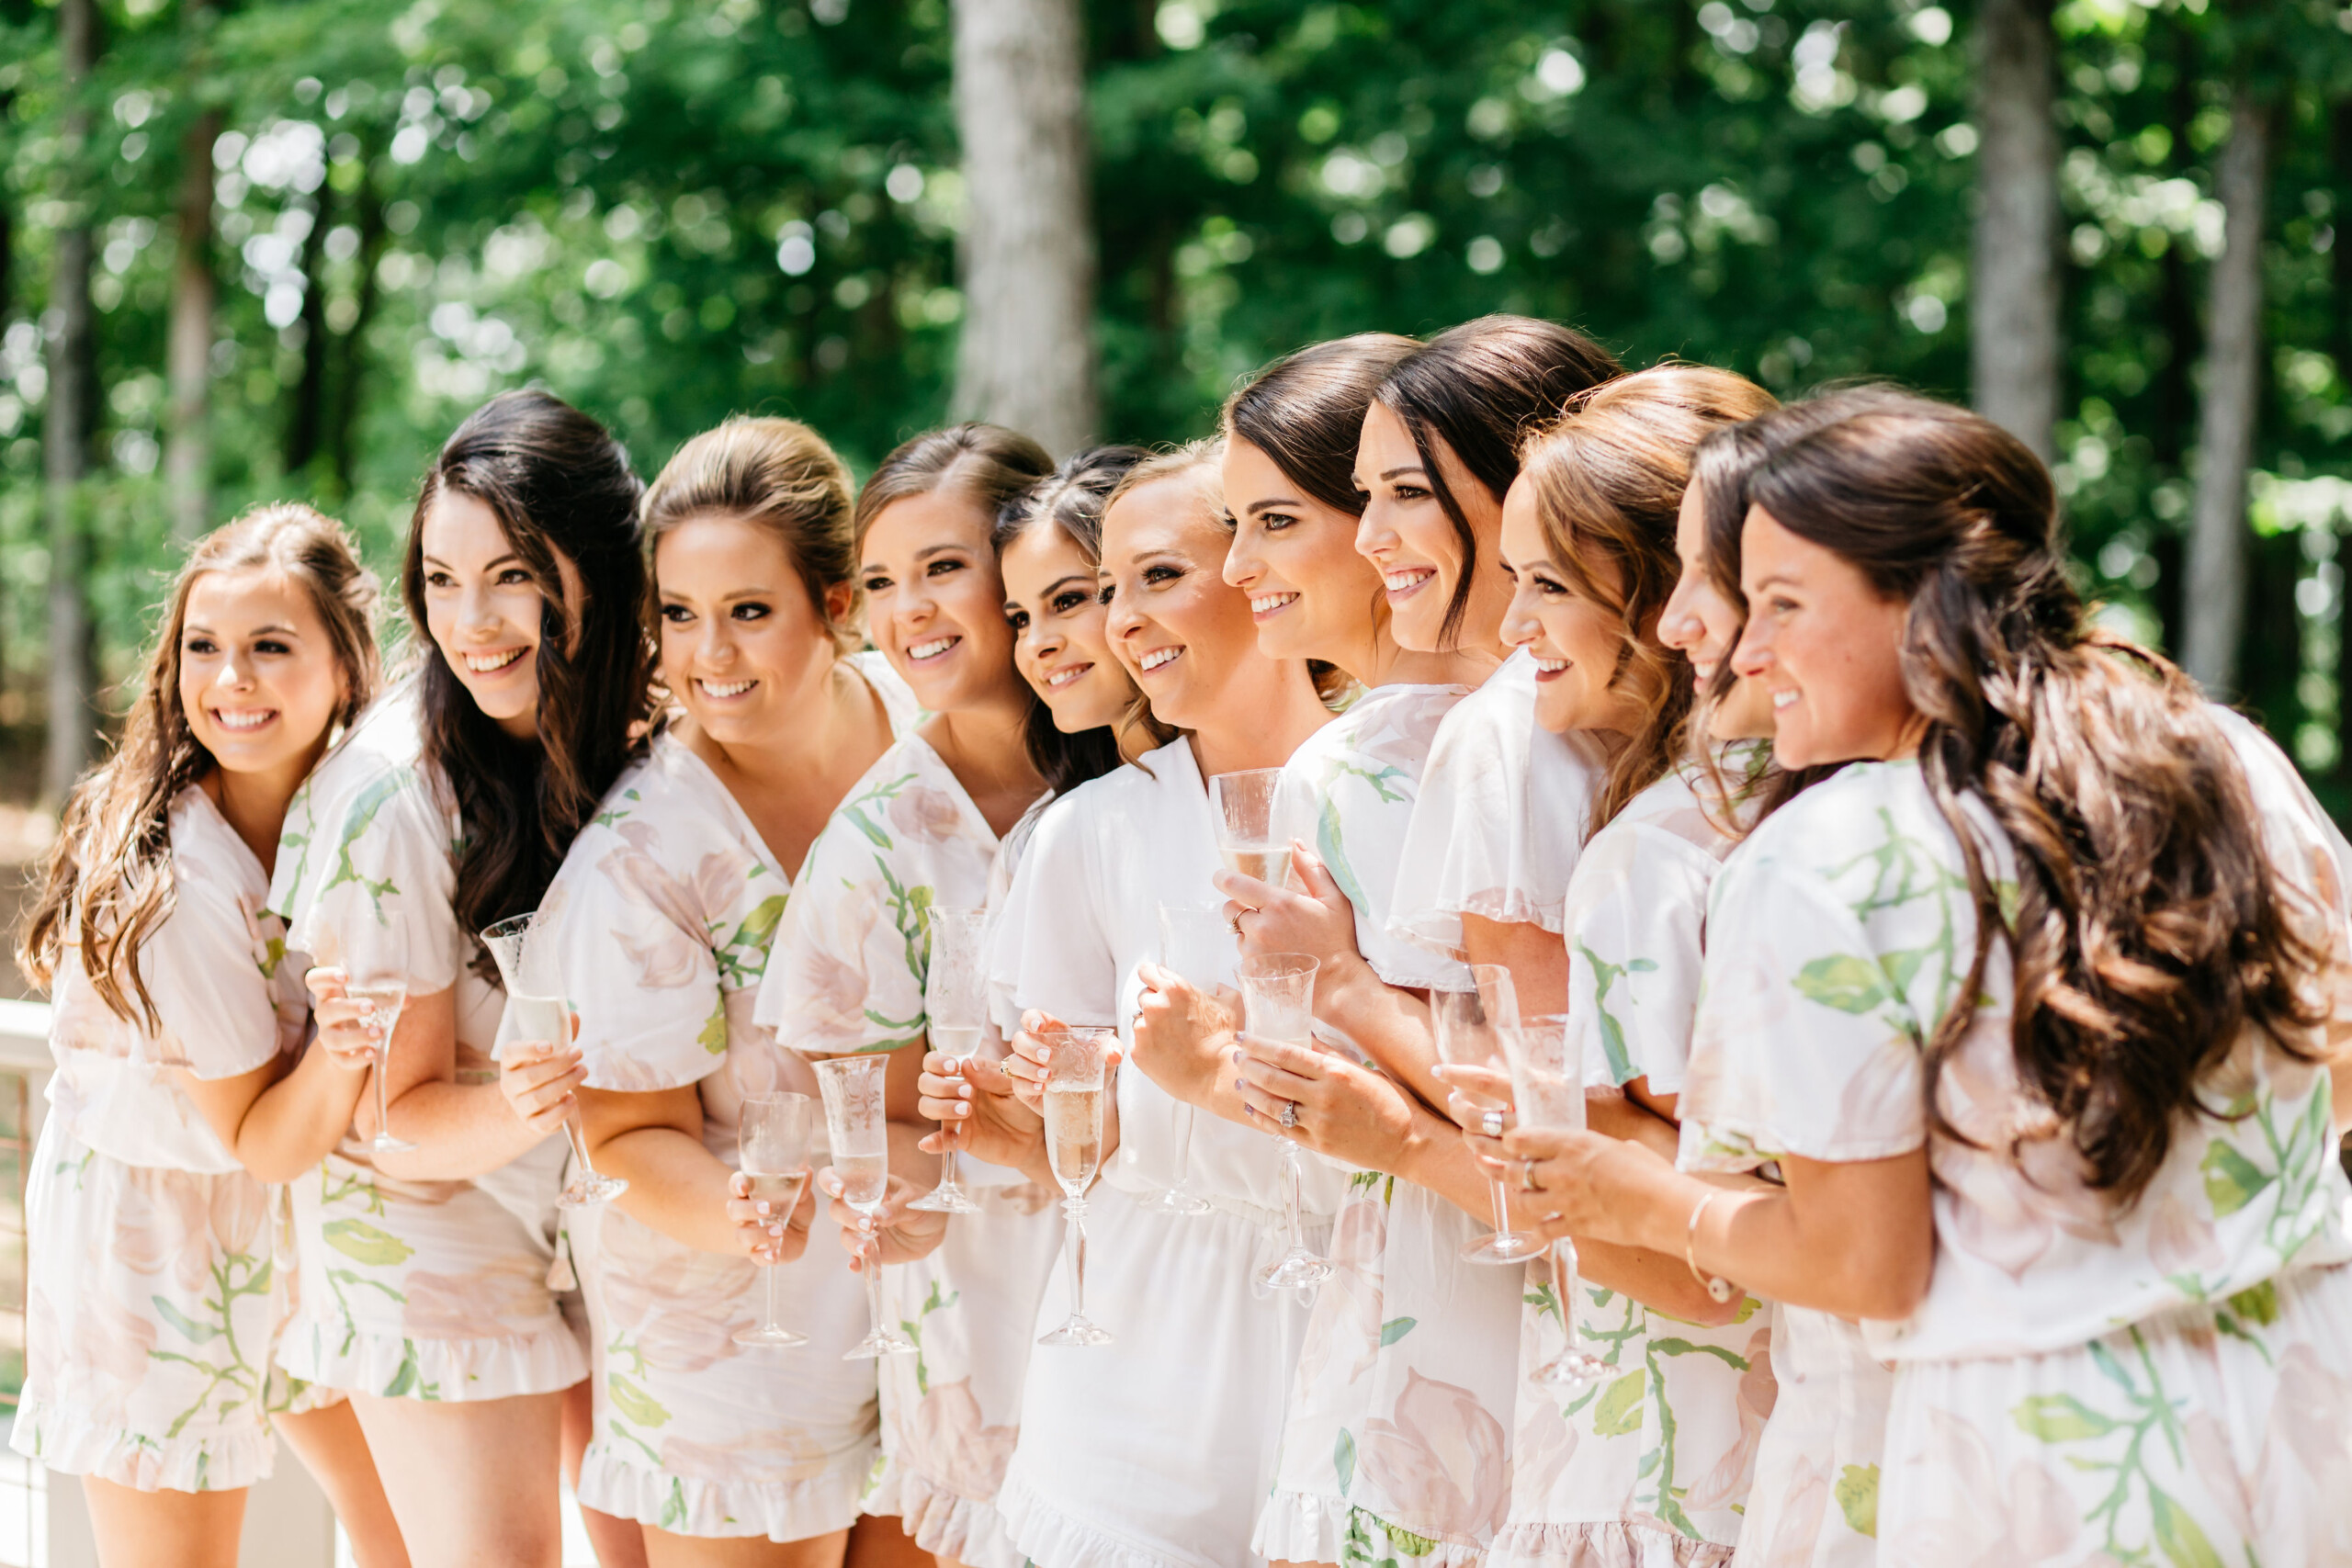 Bridal party: Rustic Front Porch Farms wedding featured on Nashville Bride Guide